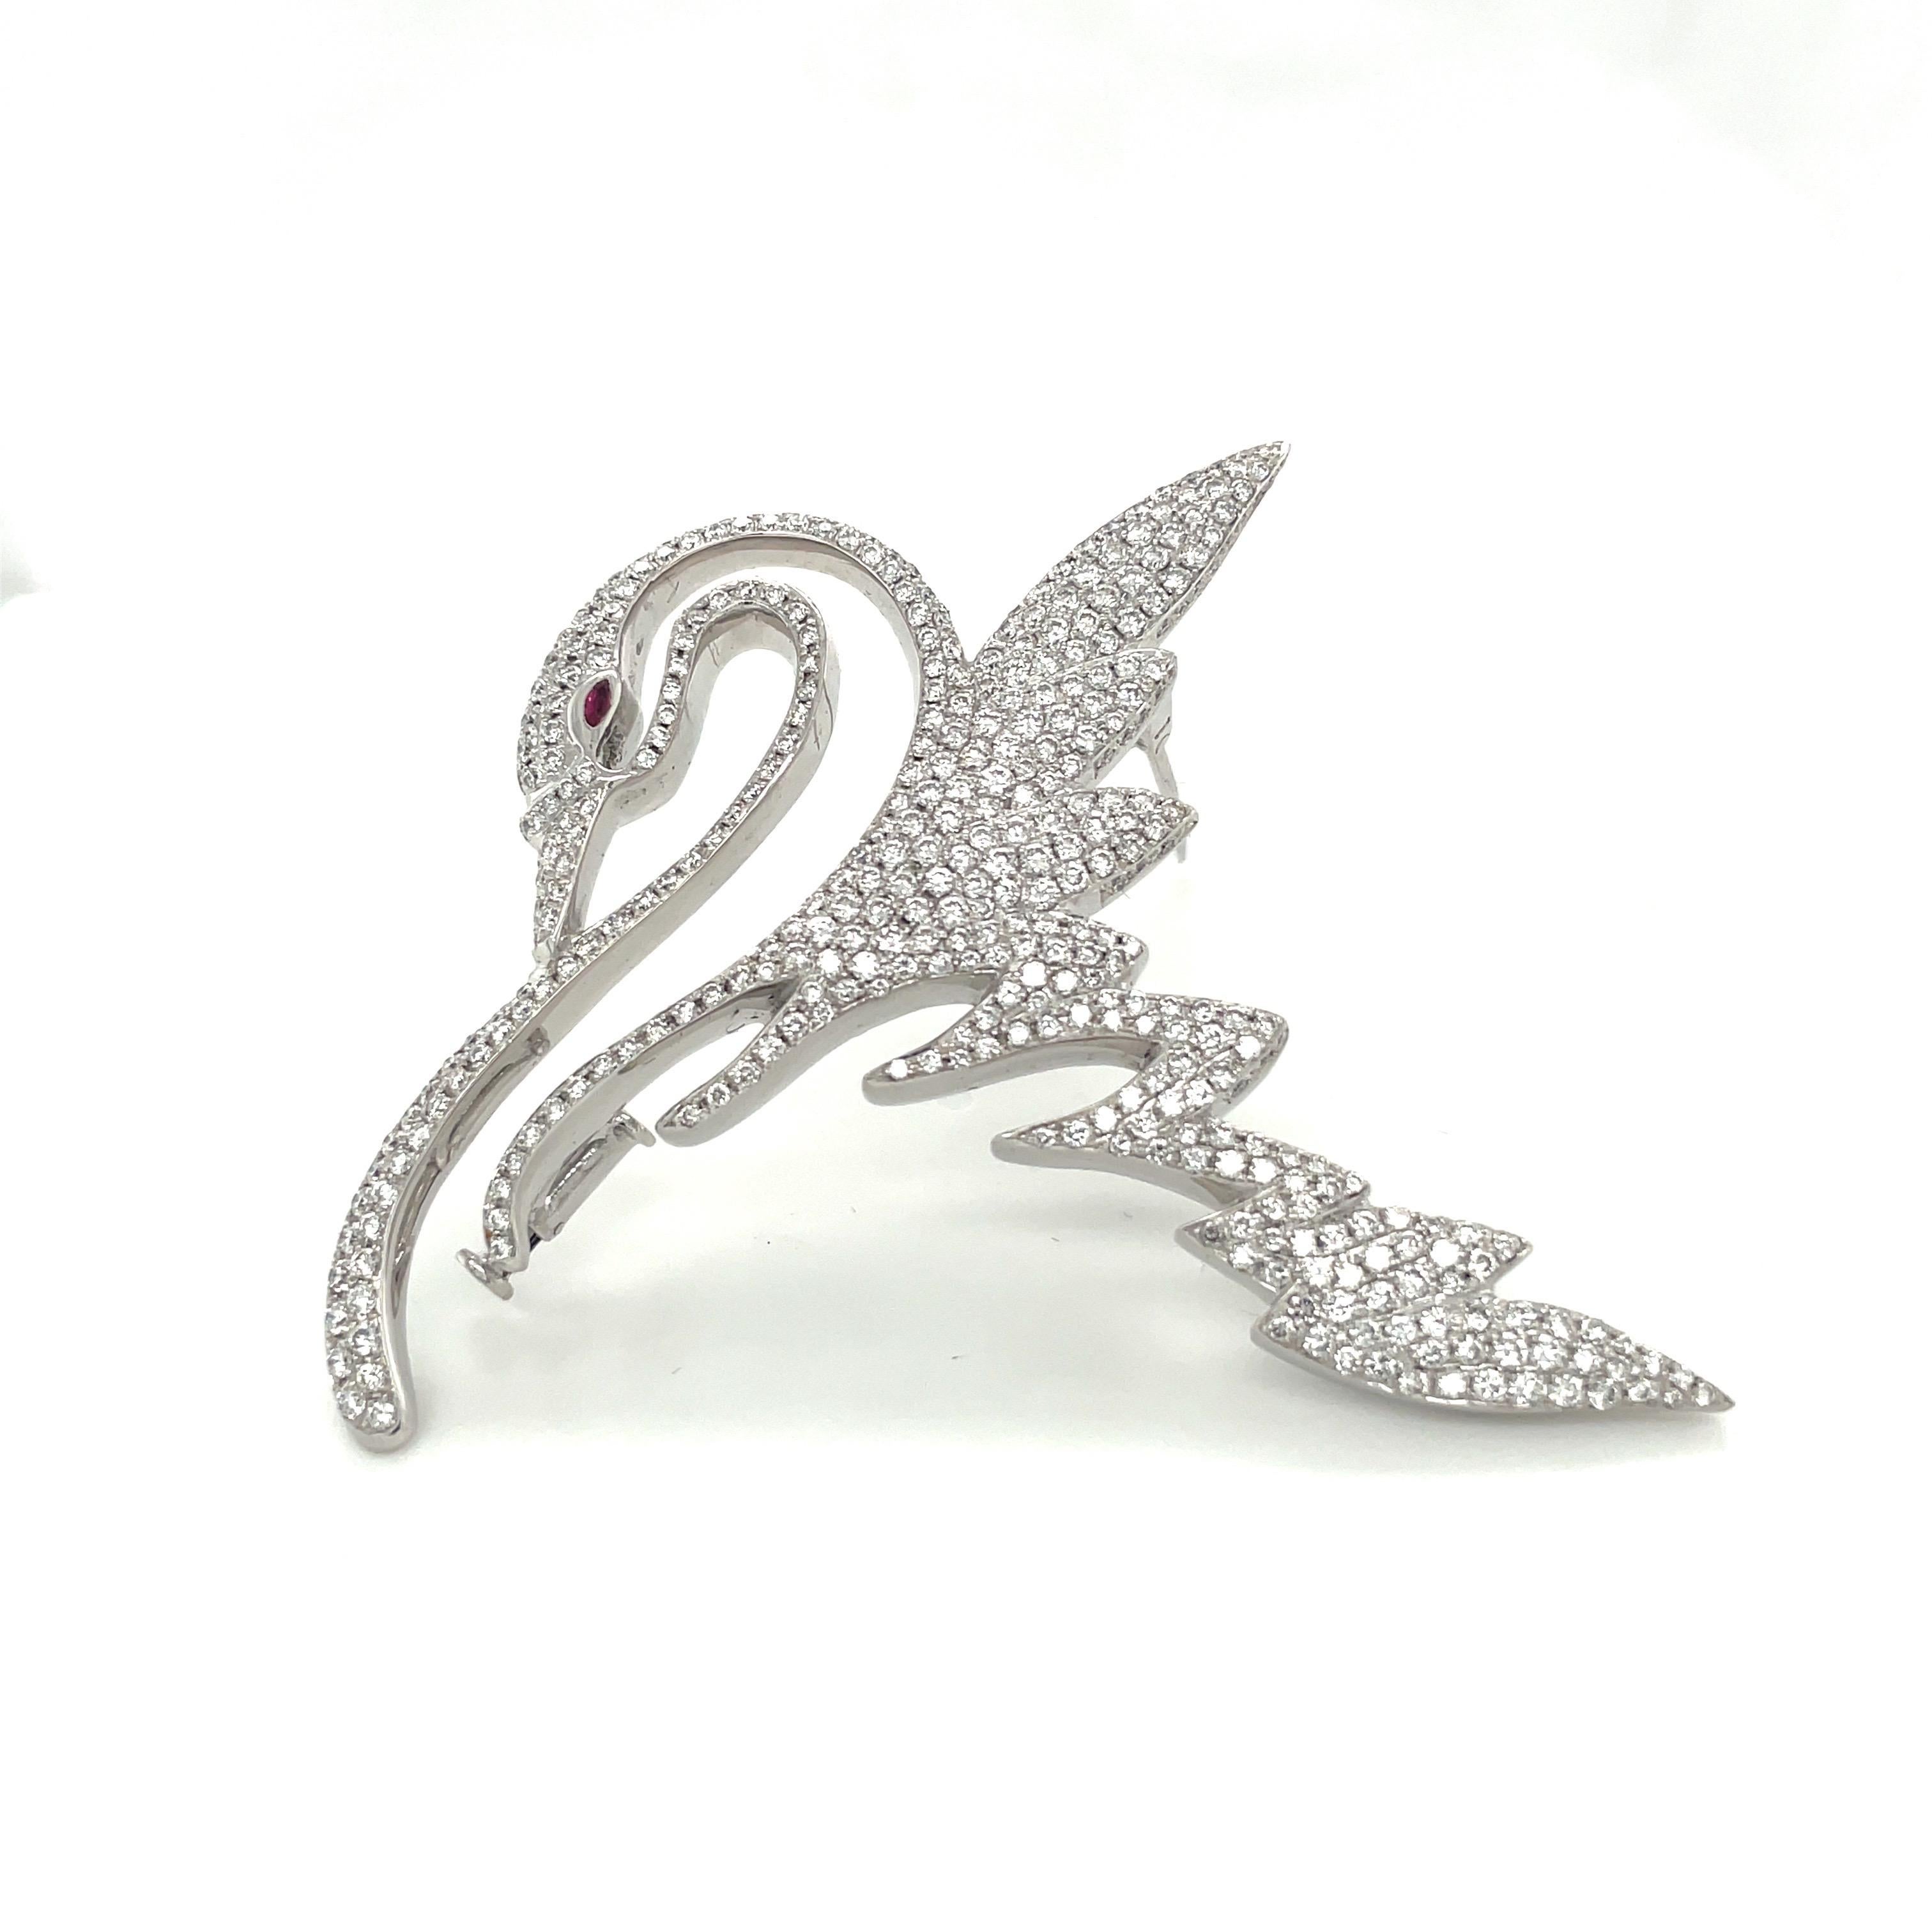 The magnificent swan brooch is designed in 18 karat white gold and is set with 4.30 carats of round brilliant diamonds. A marquise cut ruby is set as the eye. The graceful swan is 2-5/8